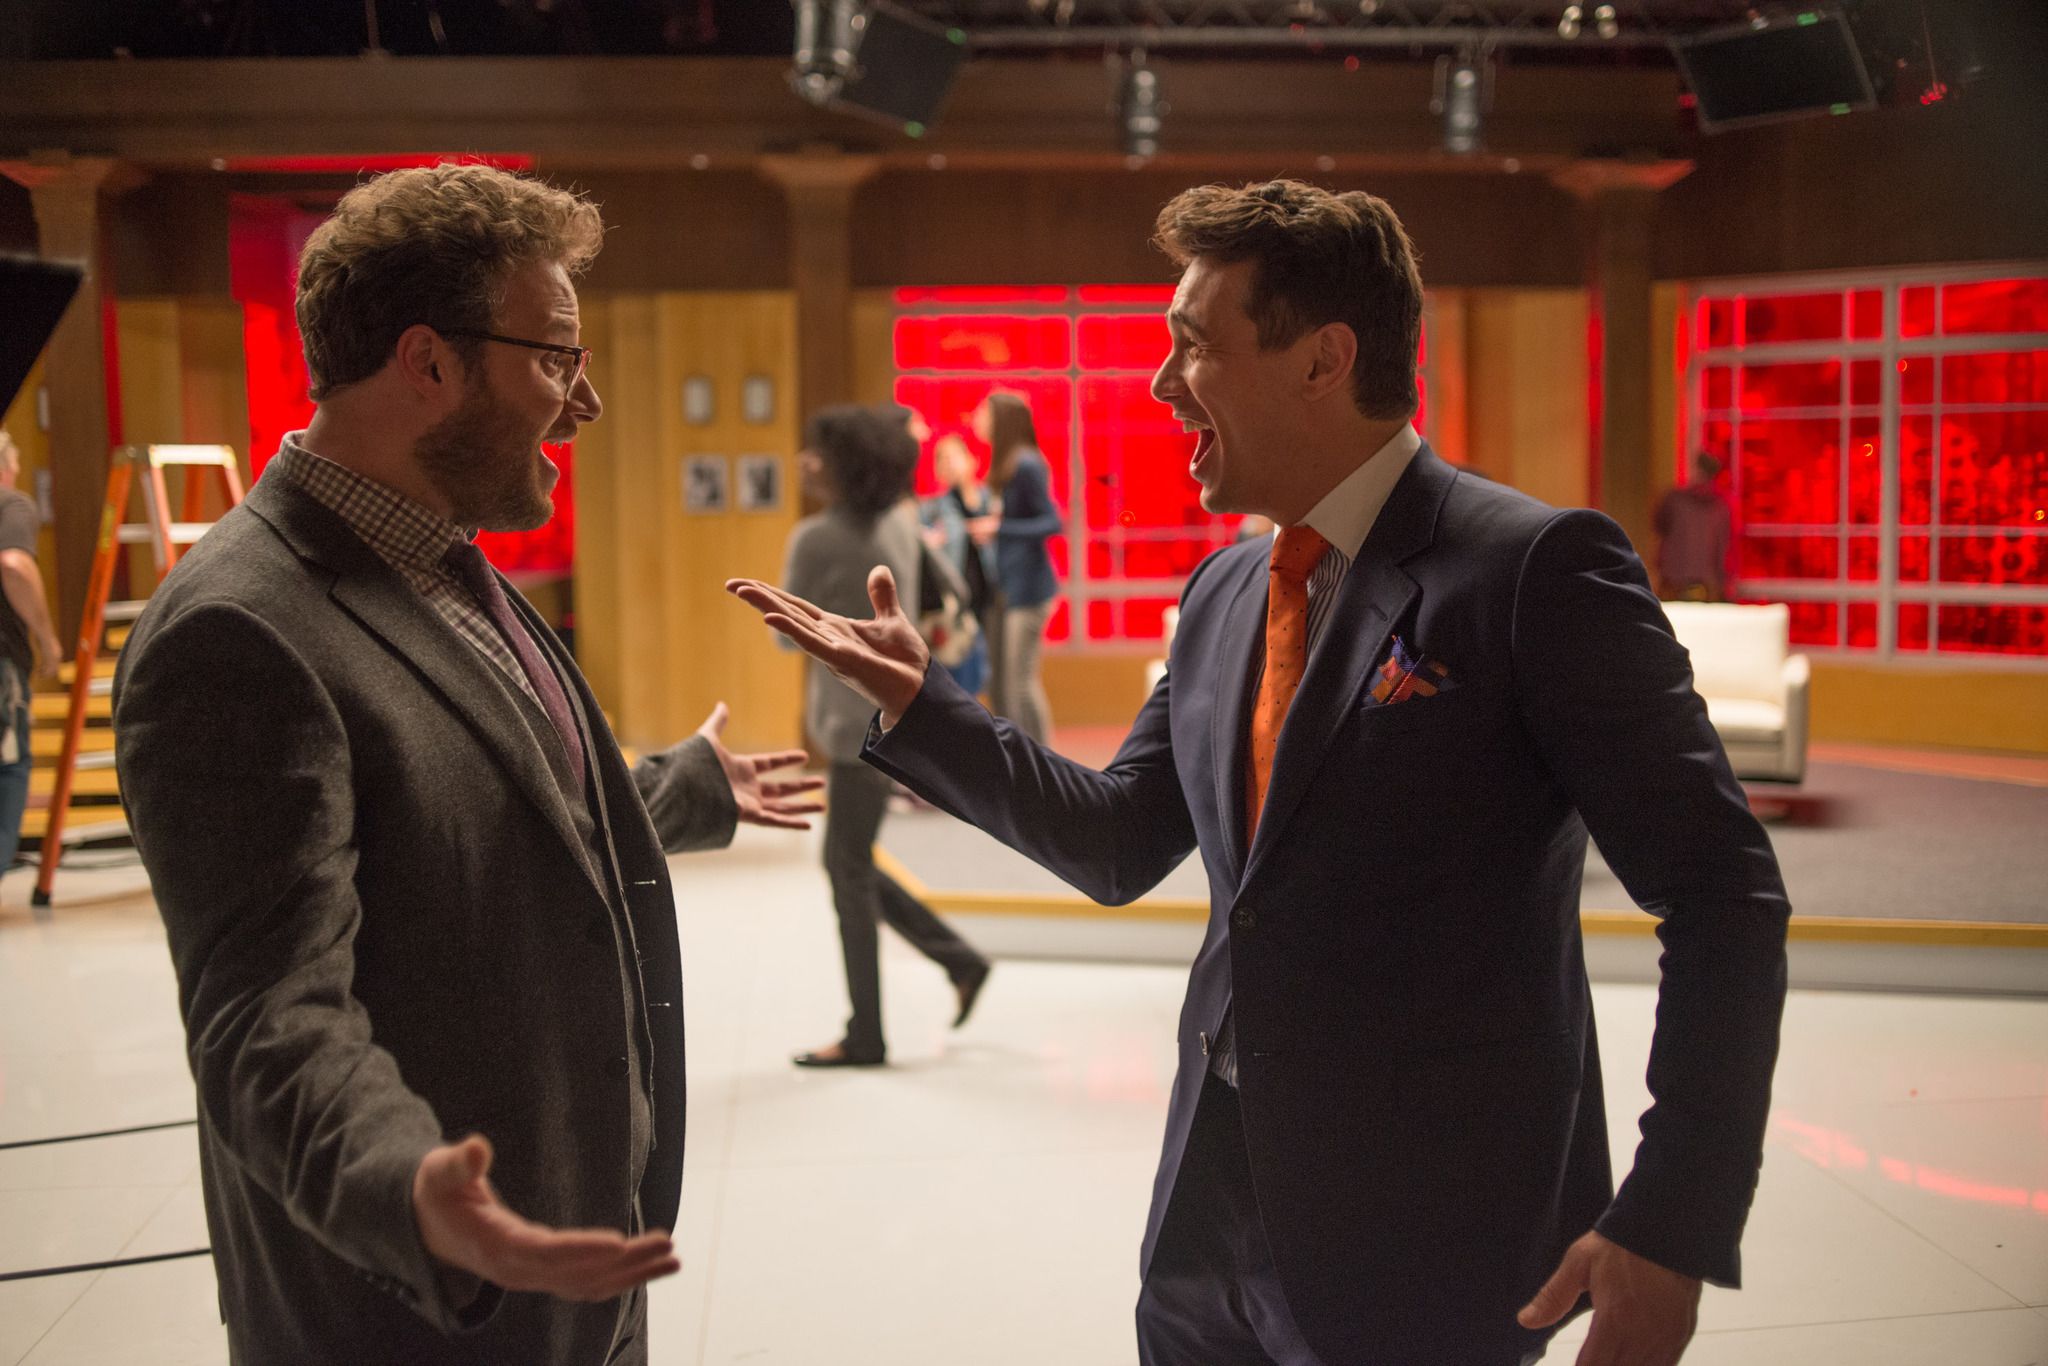 The Interview makes $40 million on VOD